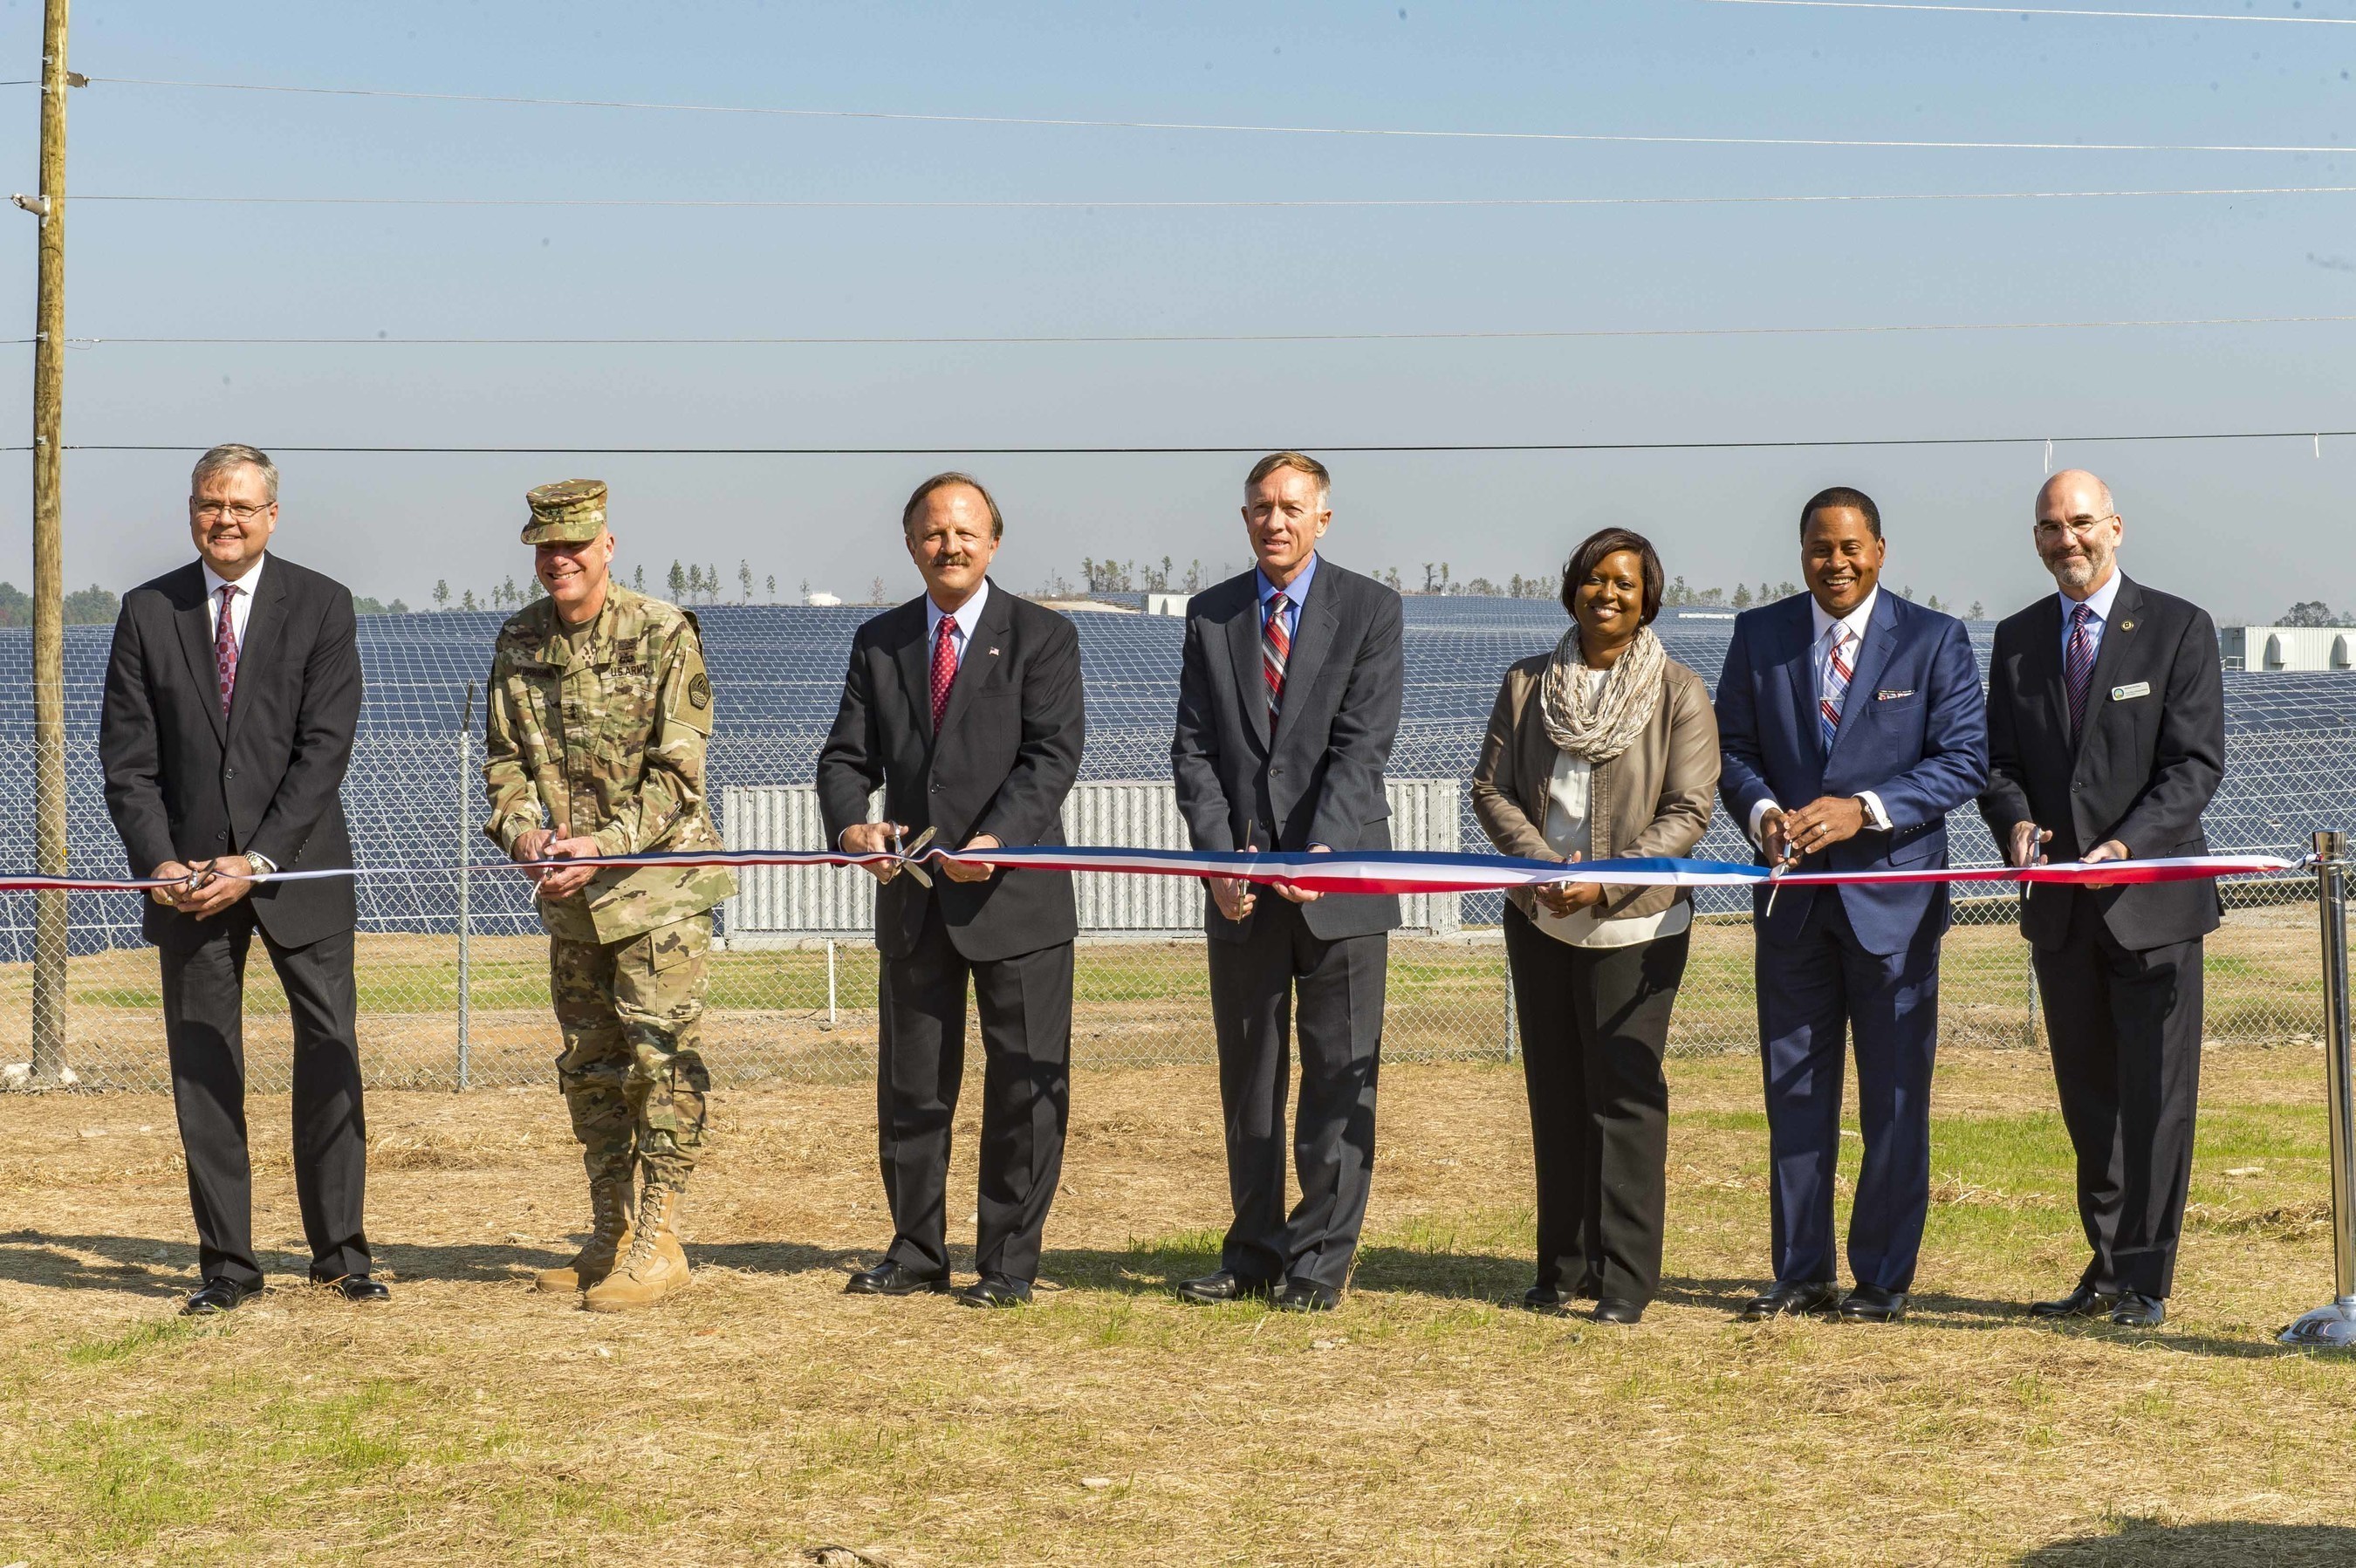 Leaders from Georgia Power and the U.S. Army joined elected officials, community leaders and other dignitaries at Fort Gordon near Augusta, Ga. on Nov. 16, 2016 to dedicate a new 30 megawatt (MW) on-base solar facility. The project is the third completed by Georgia Power in collaboration with the military, joining similar on-base solar facilities recently unveiled with the U.S. Army at Fort Benning and the Department of the Navy (DON) at Naval Submarine Base (SUBASE) Kings Bay.